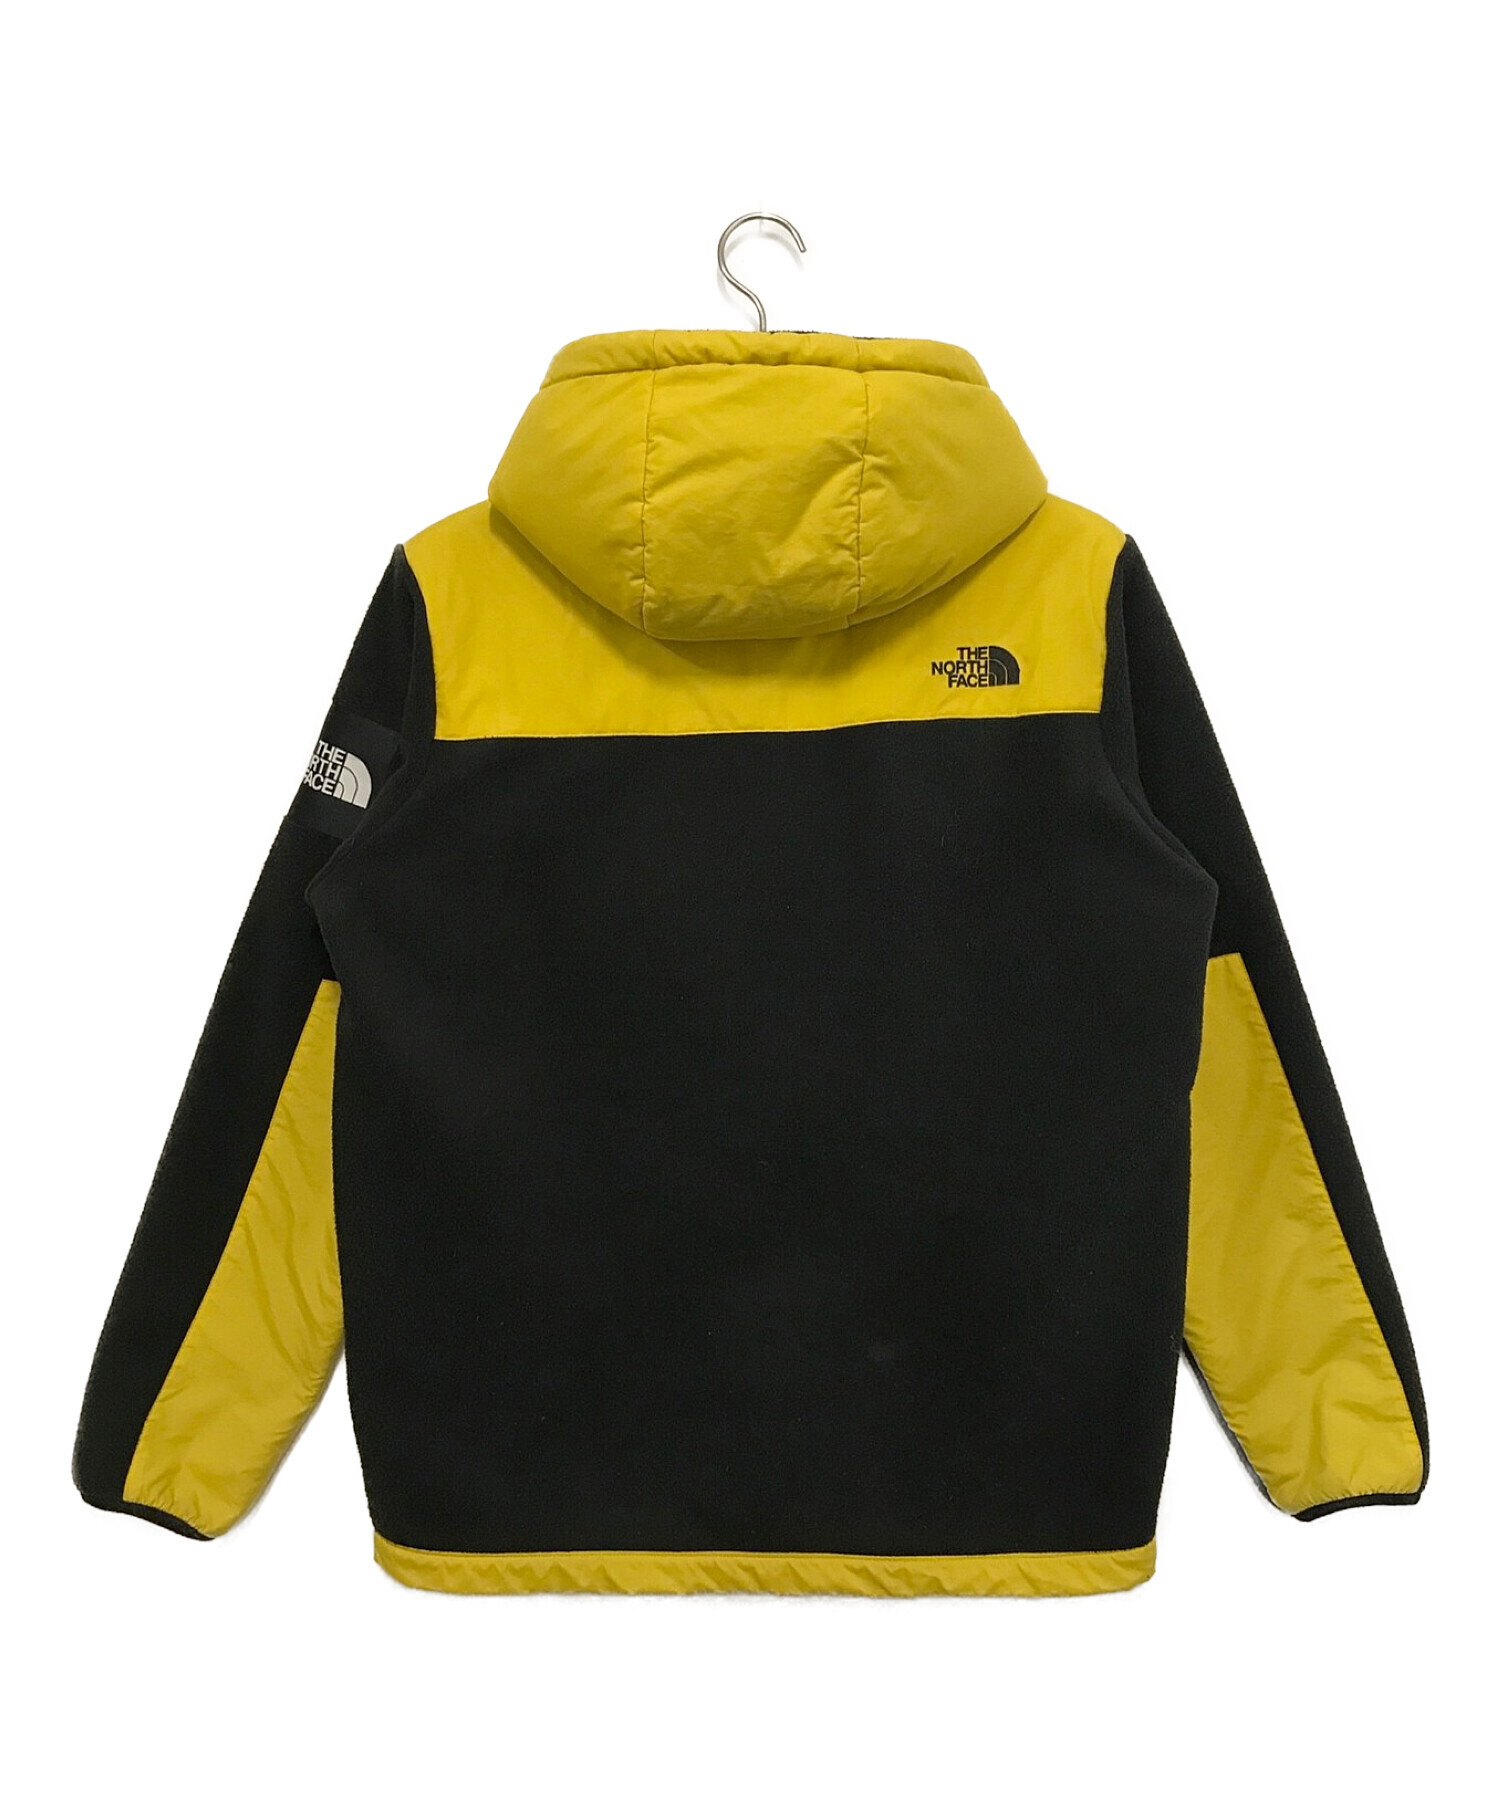 THE NORTH FACE DENALI HOODIE イエロー　L